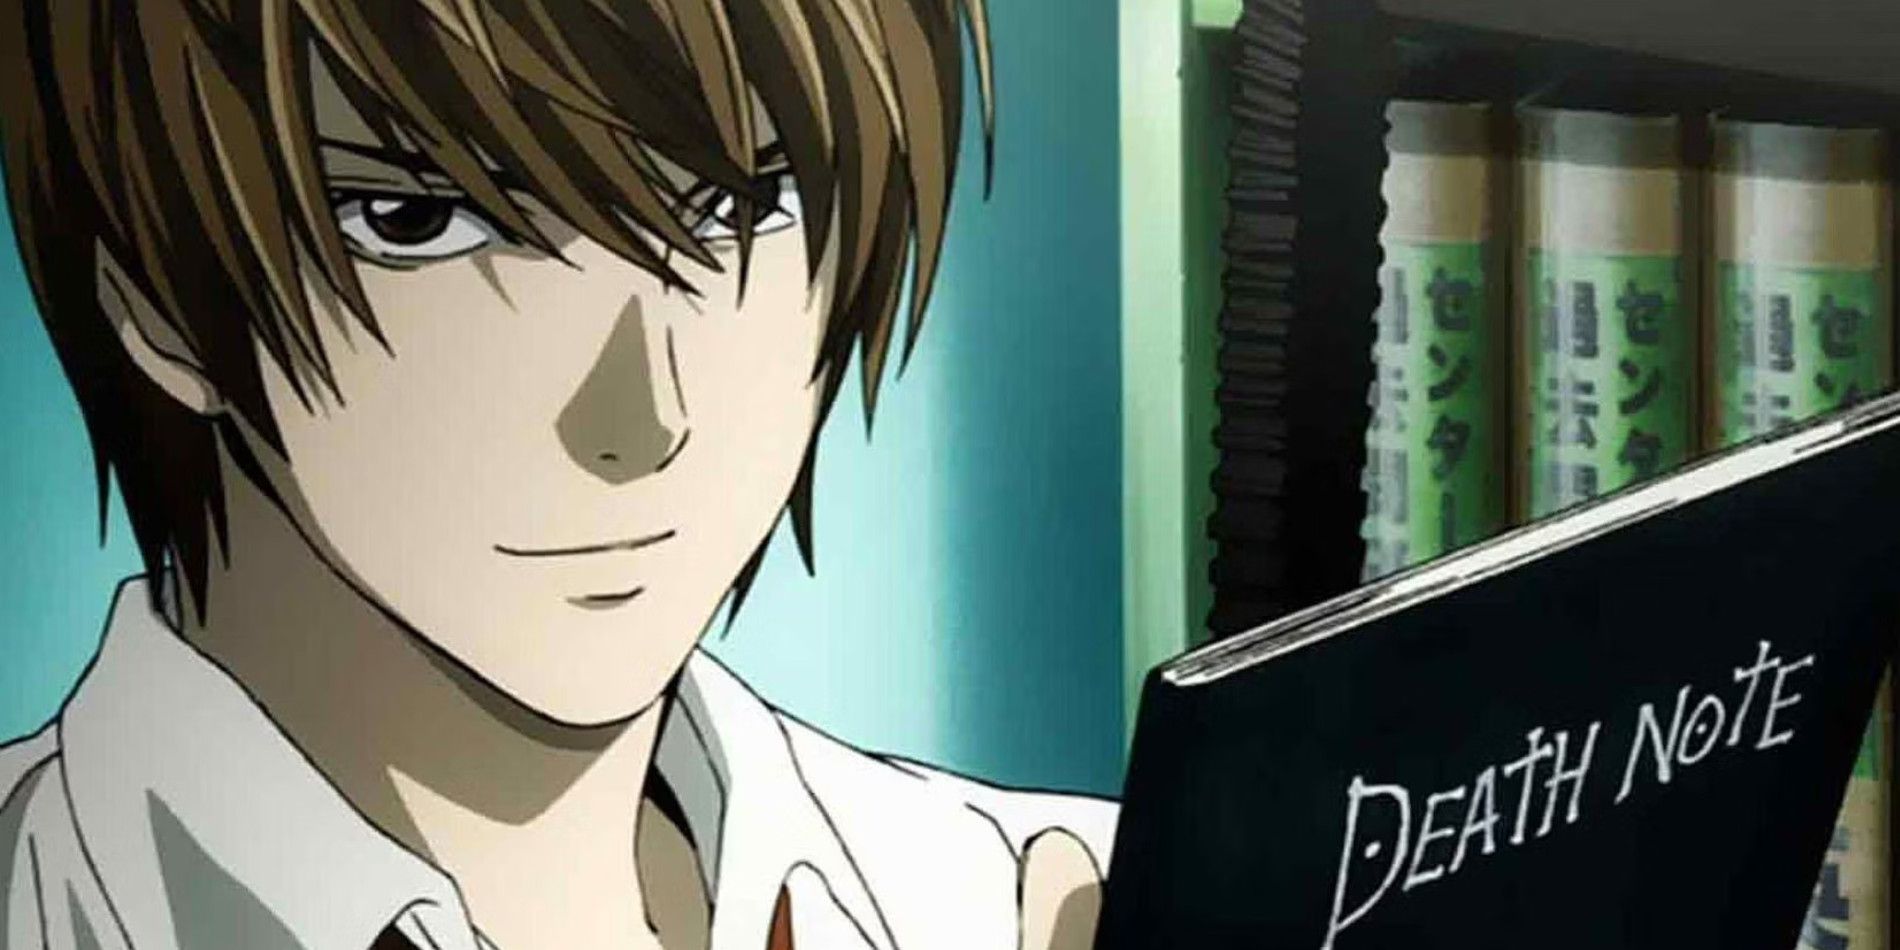 Light Holding A Death Note In The Anime